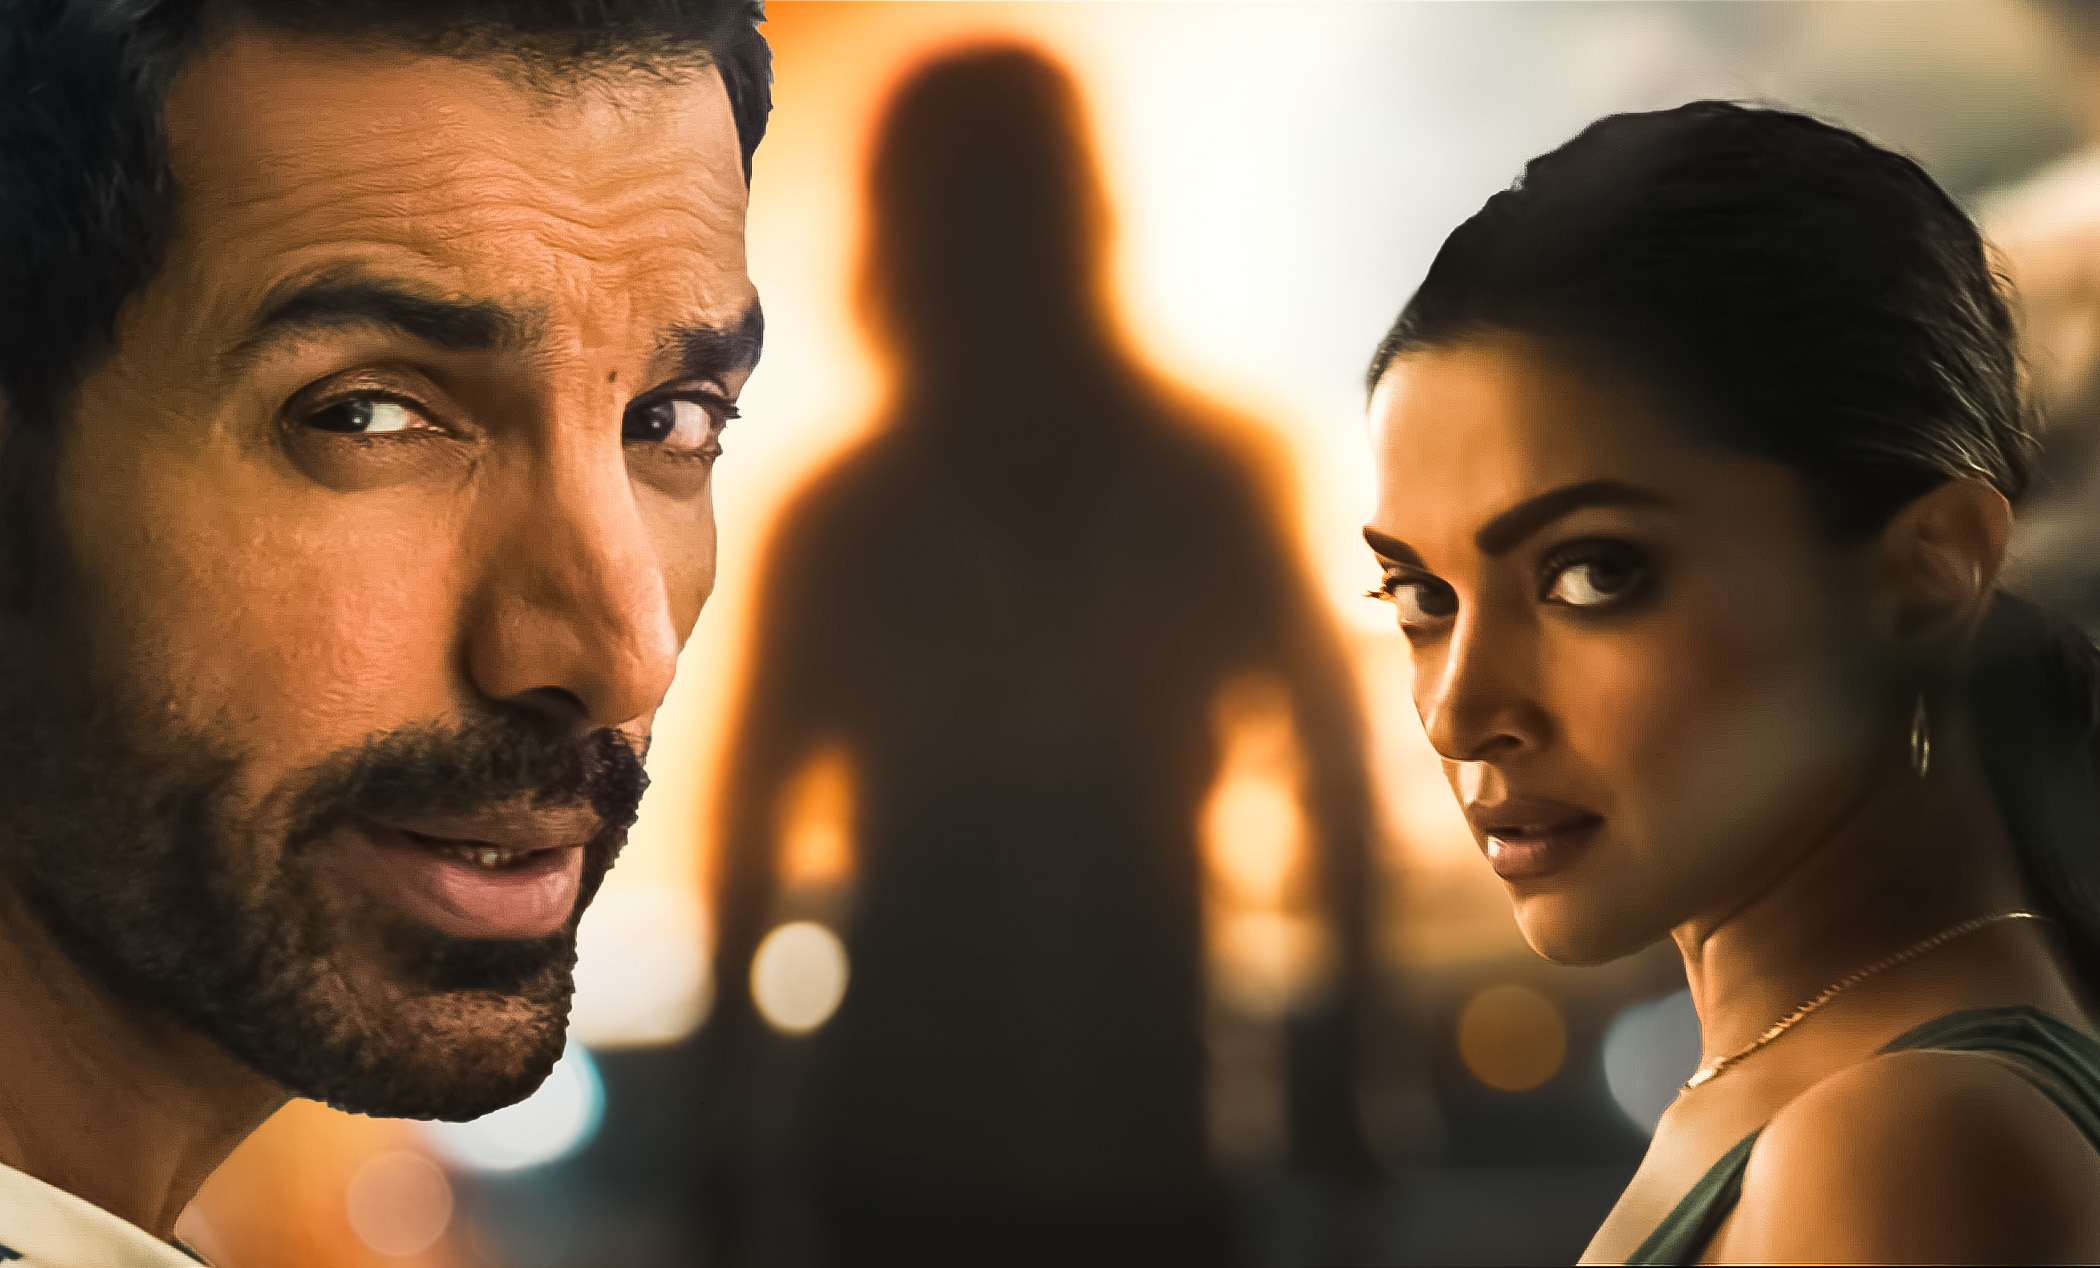 Shah Rukh Khan Unveils The Teaser Of 'Pathaan' Co Starring Deepika Padukone And John Abraham; Film To Release On Republic Day 2023